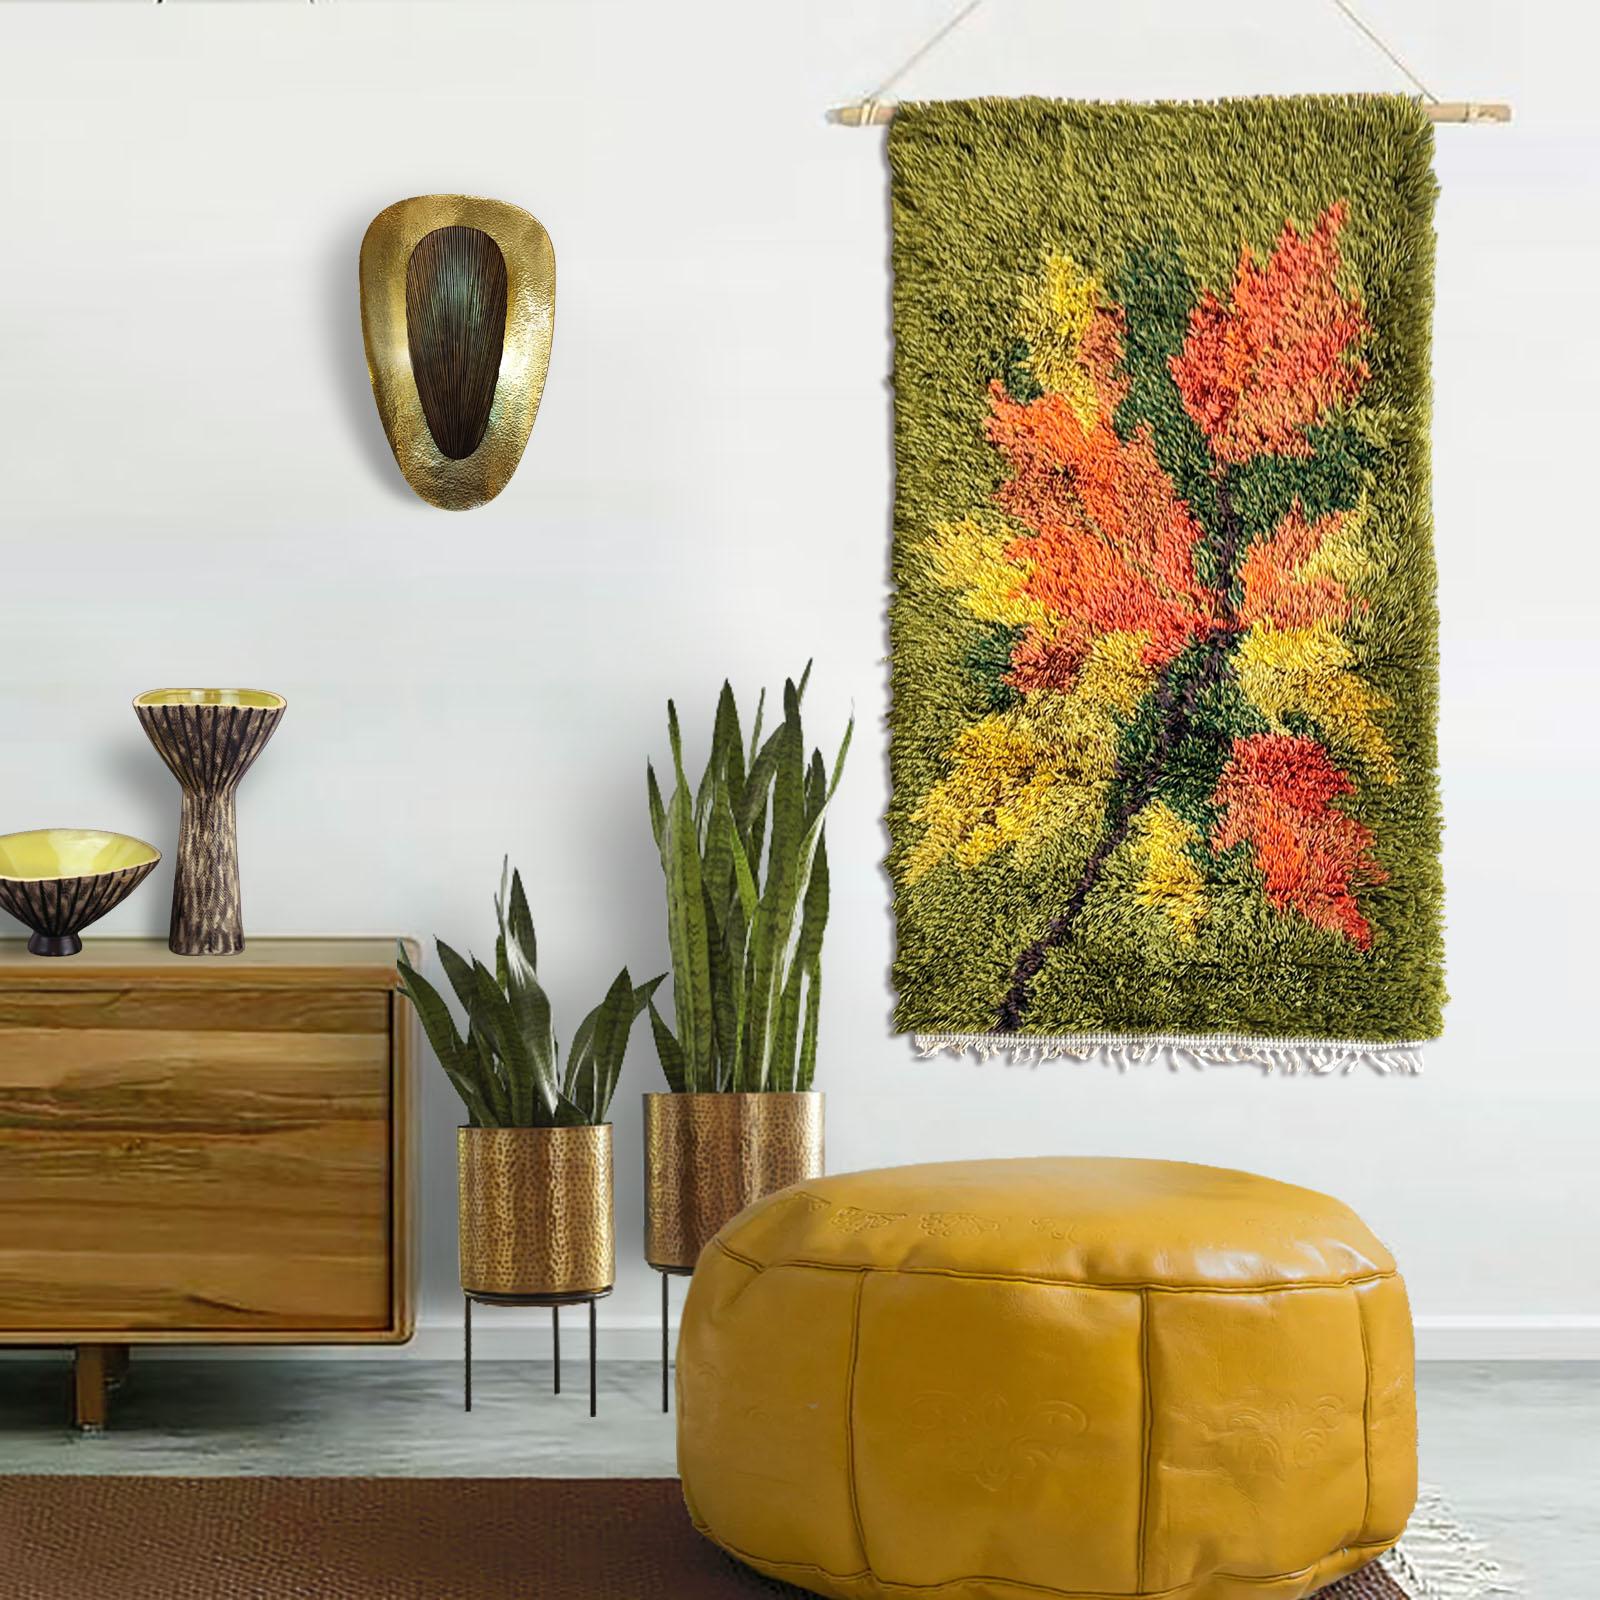 Midcentury Danish Modern Ege Rya Wool Shag Rug 'Autumn Leaf' 2,5' x 4,9'
Vintage Danish modern Rya rug made of 100% wool made. This piece is entitled 'Autumn Leaf' and was used as a wall hanging by its previous owner, it has the wood rod and ooks to